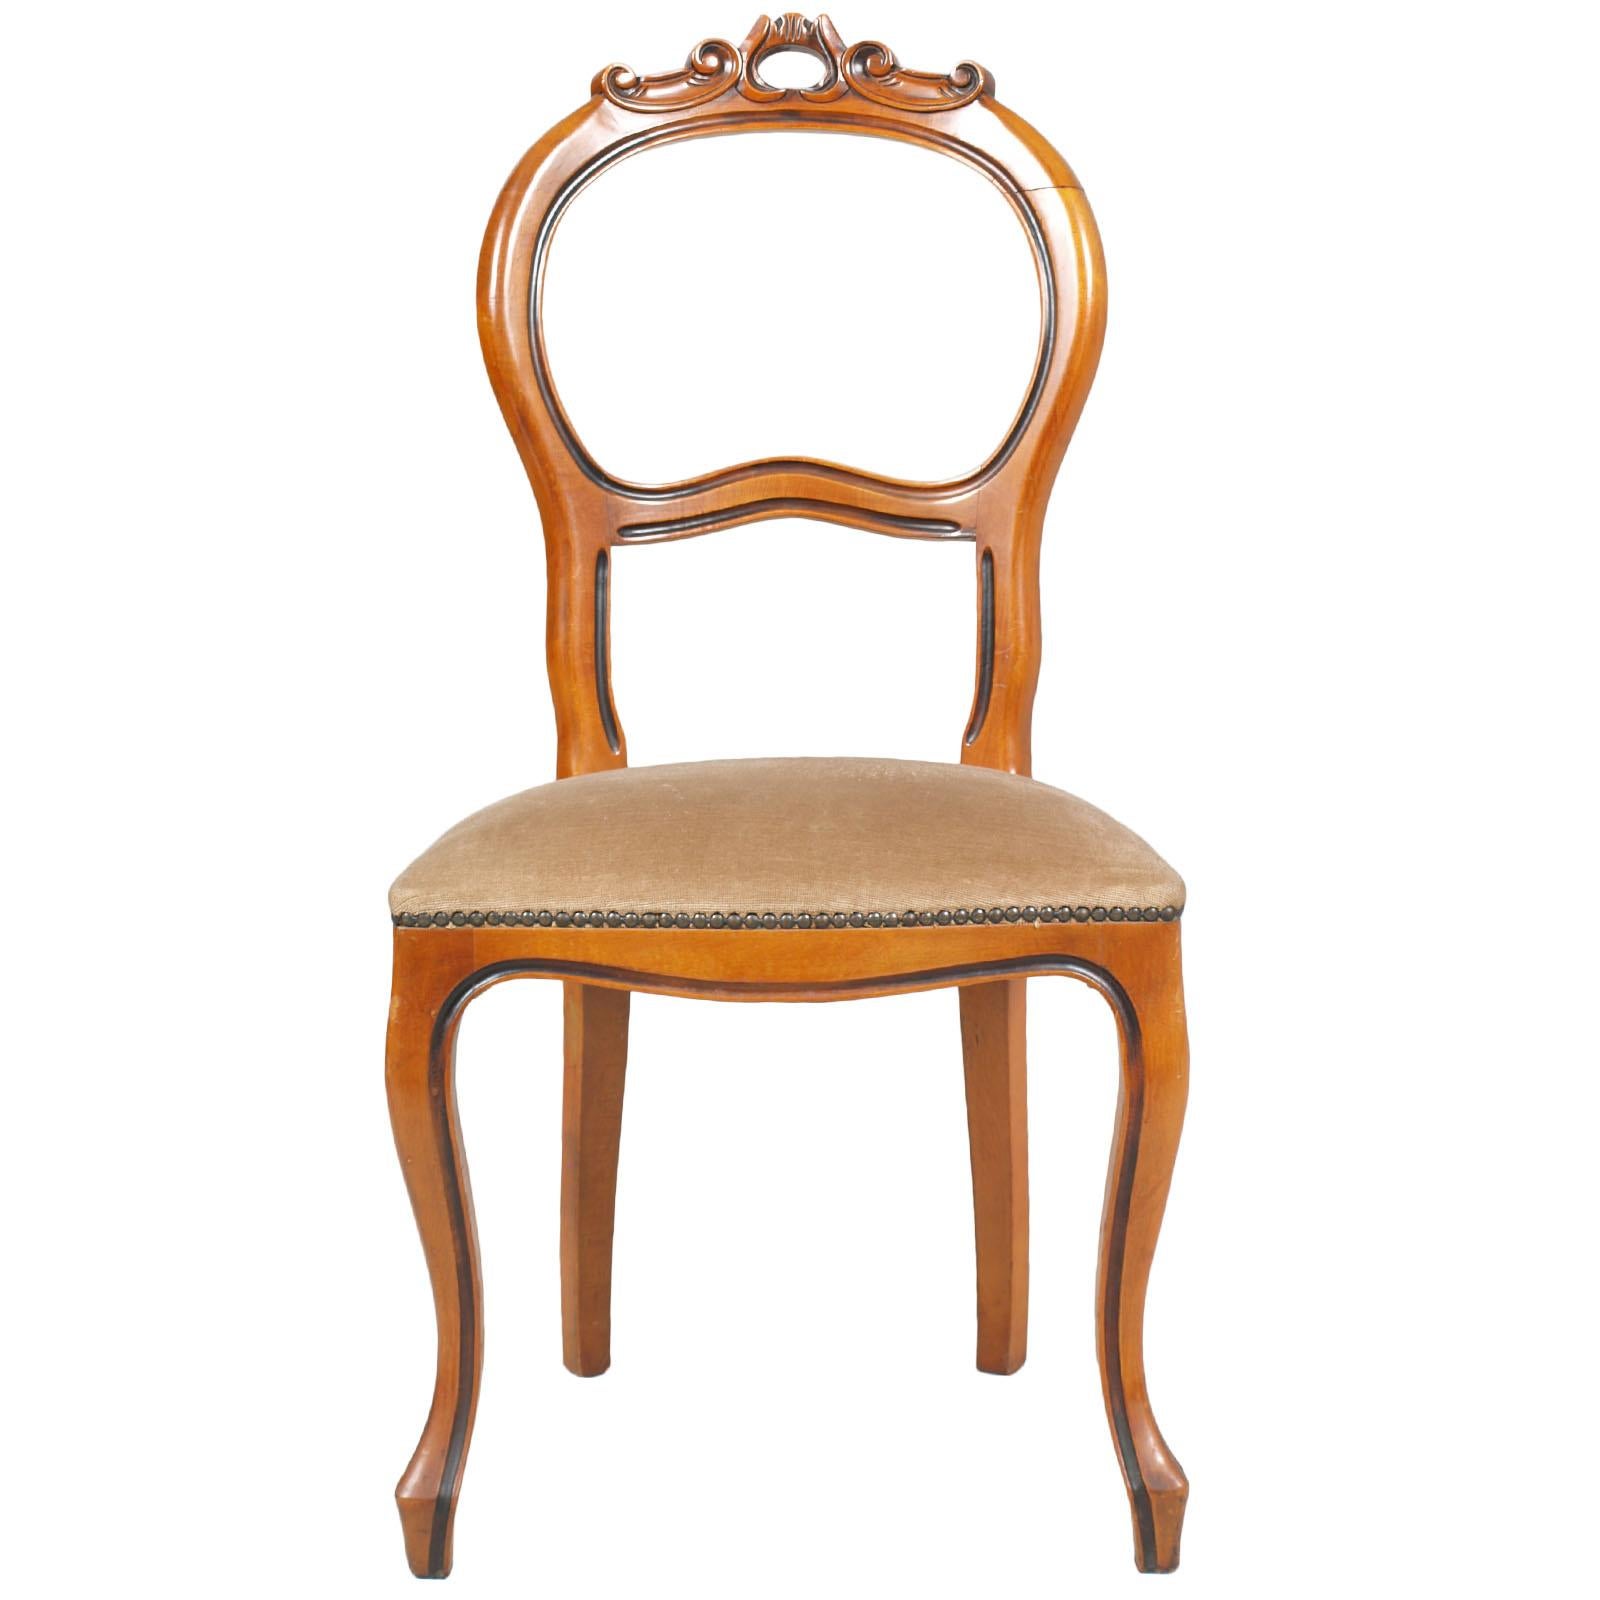 They can be sold separately
Baroque Ferrarese burl walnut with neoclassical references , Art Decò age, table with six chairs of the early twentieth century, in solid blond walnut. Shaped oval shaped table, with hand carvings on the apron and